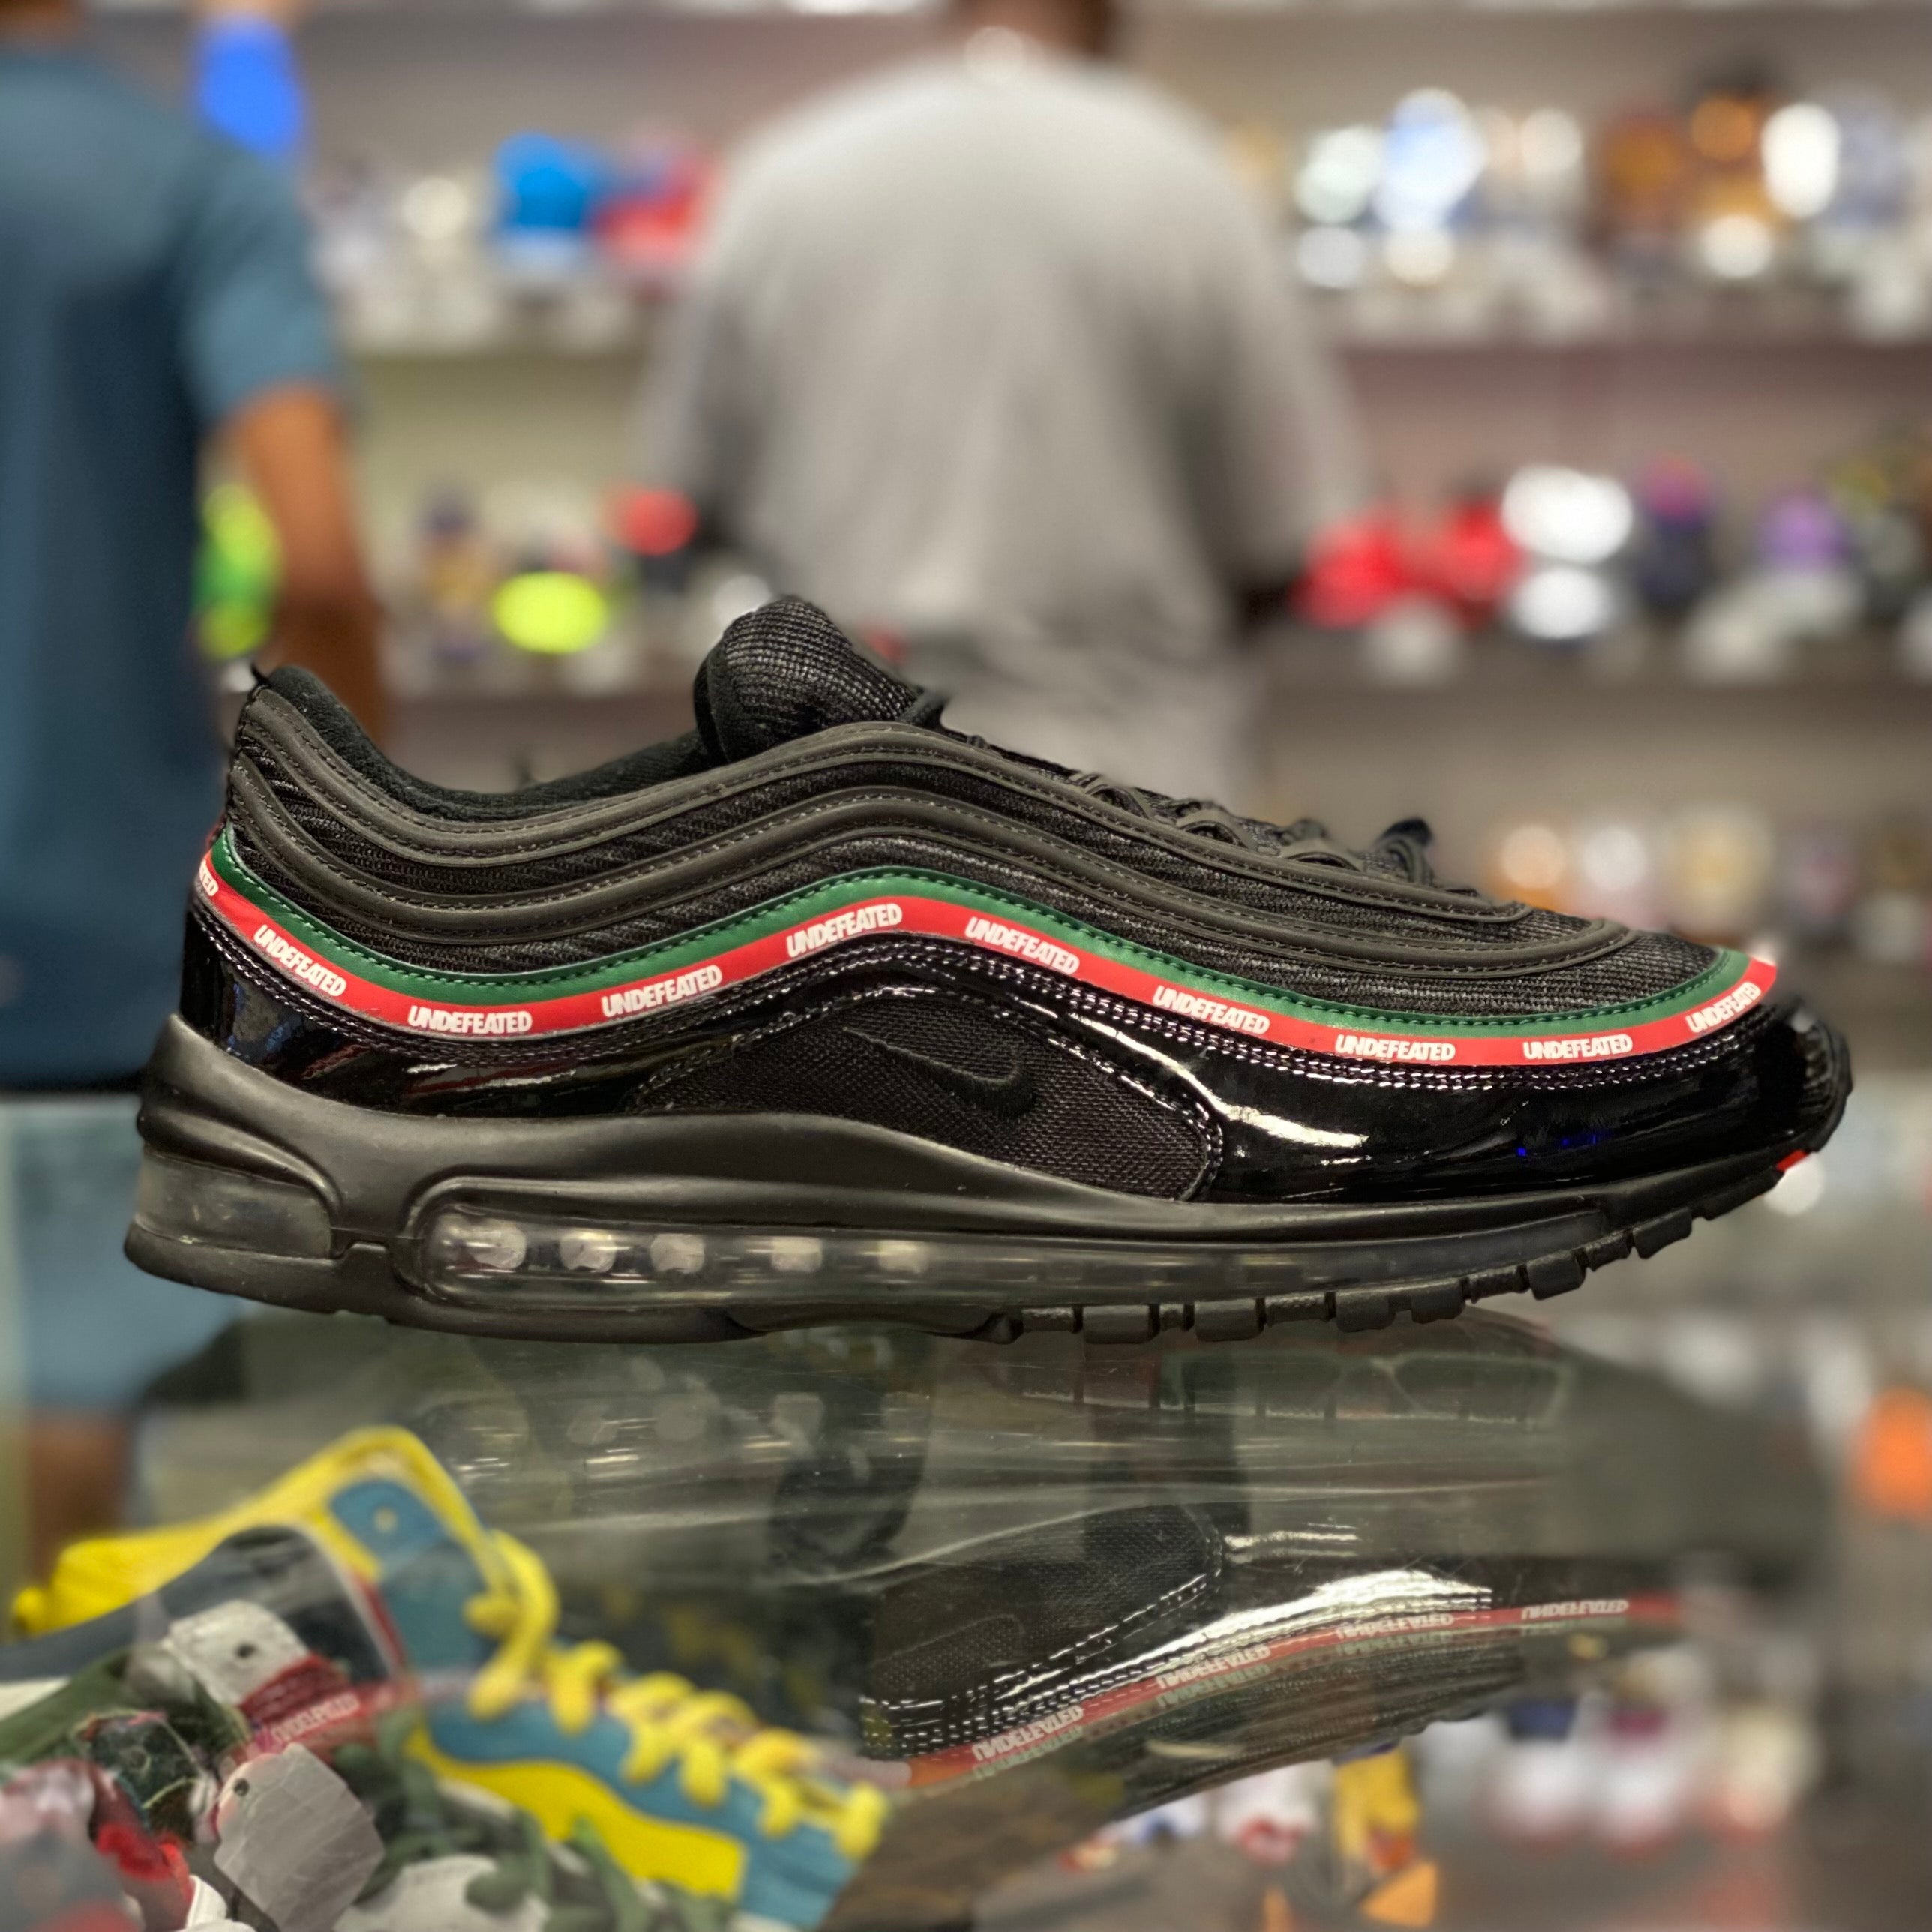 Nike Air Max 97 Undefeated “Black”